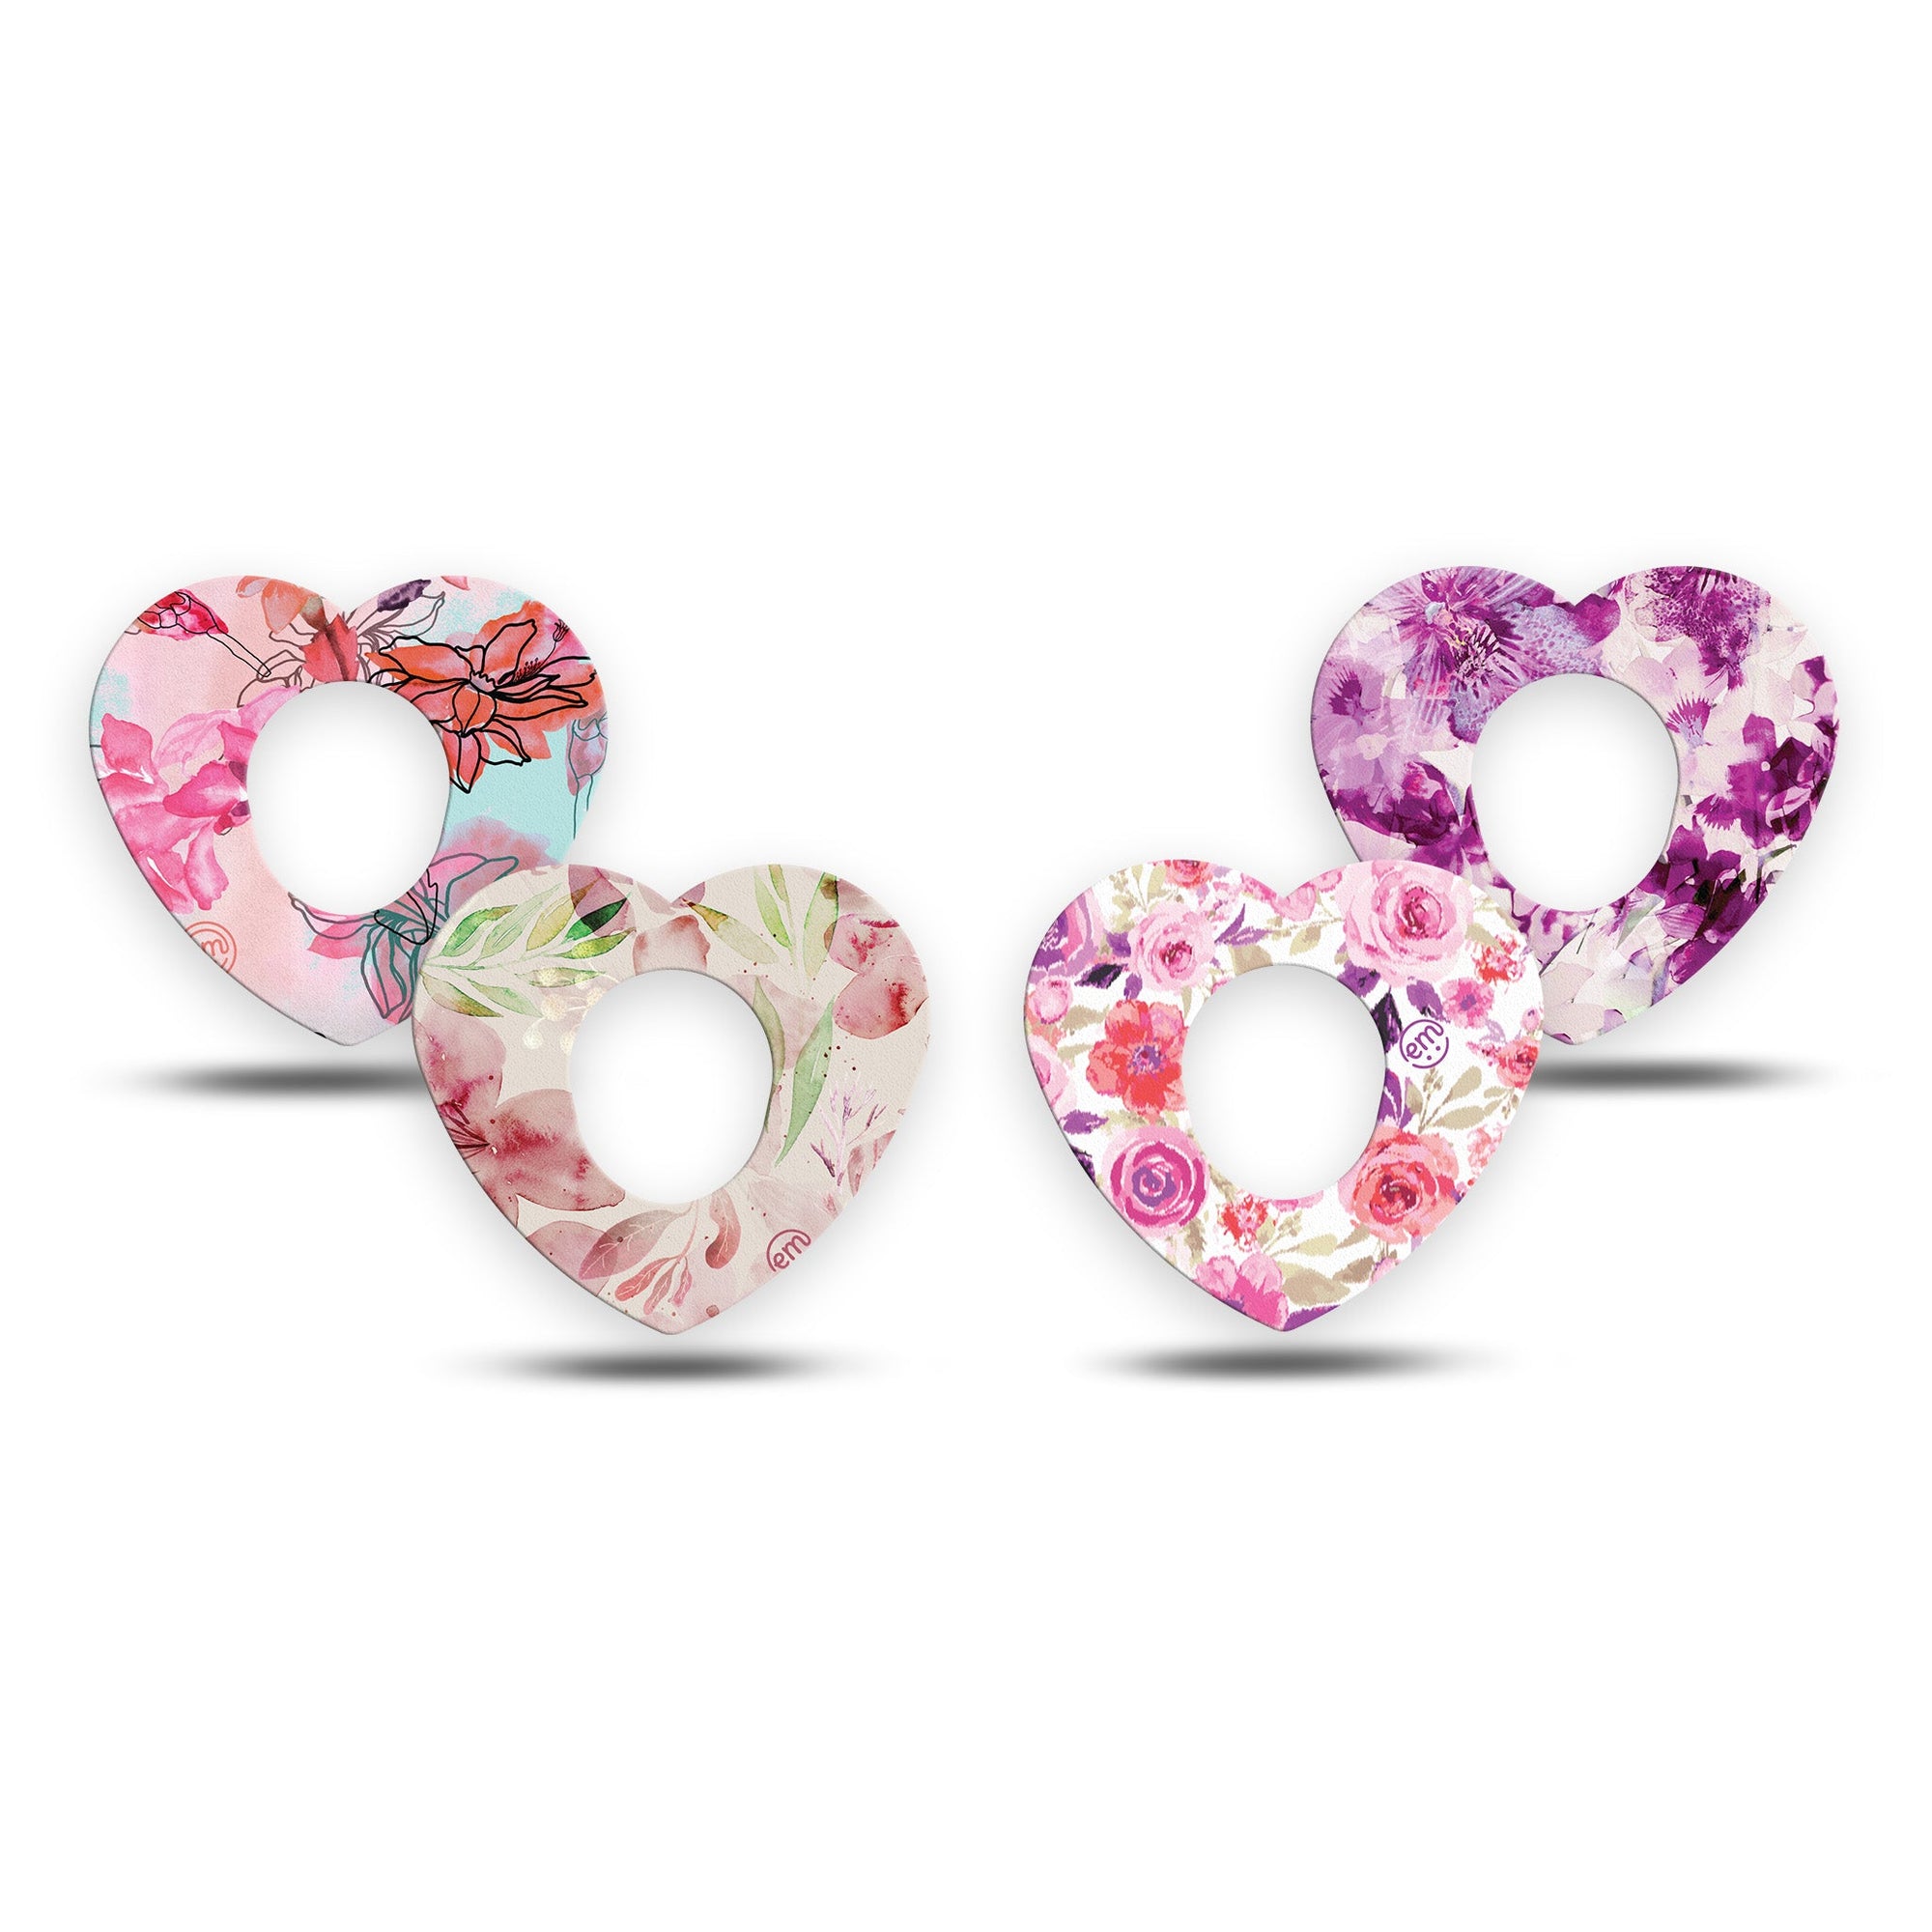 ExpressionMed Mixed Florals Variety Pack Dexcom G7 Heart Shape 4-Pack Pink Petals Fixing Ring Tape CGM Design, Dexcom Stelo Glucose Biosensor System